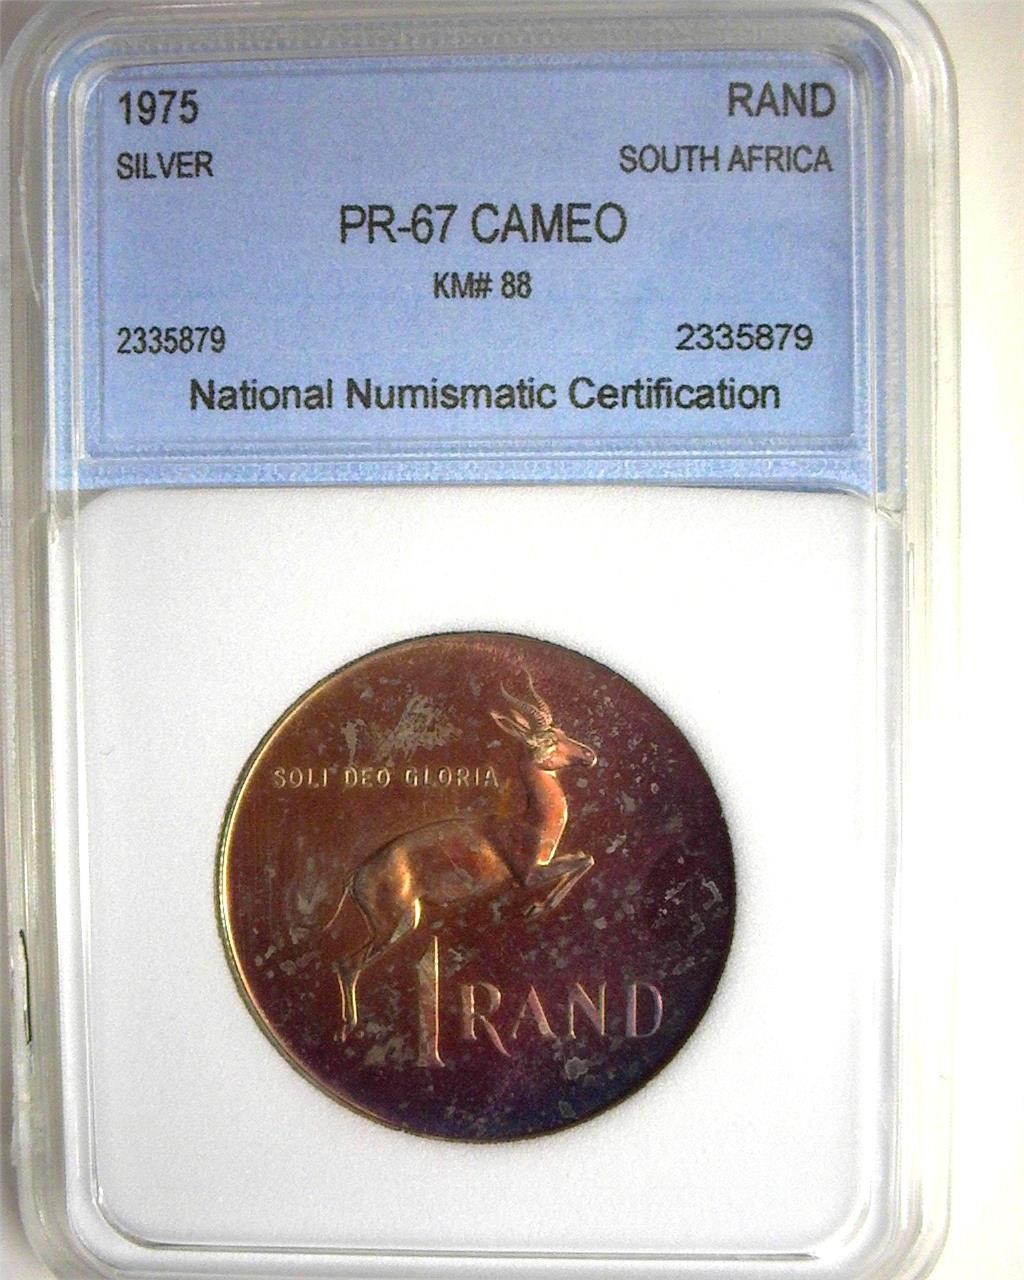 1975 Rand NNC PR67 Cameo S. Africa Silver